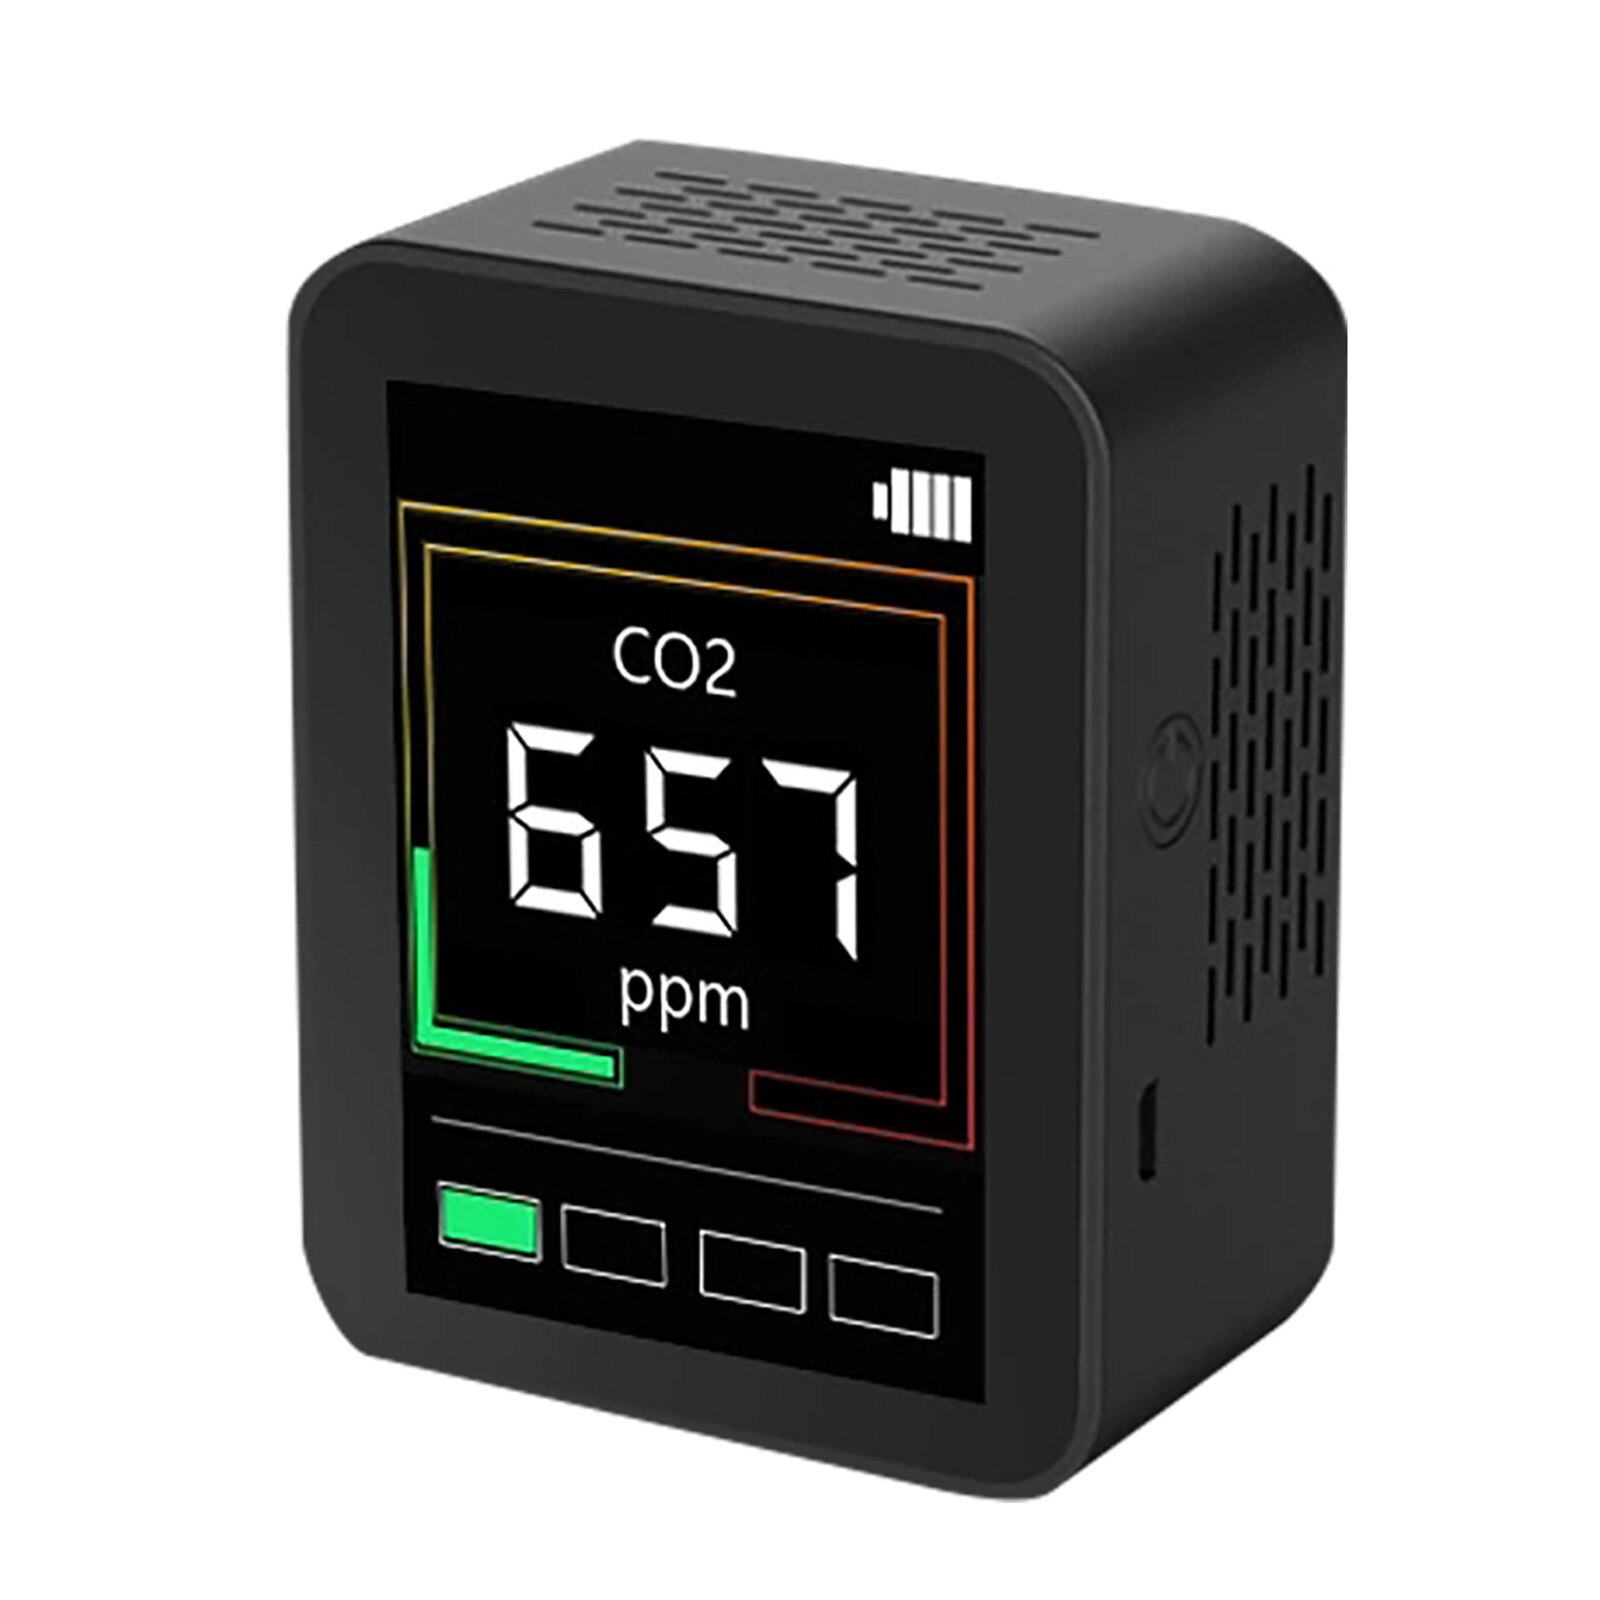 Carbon Dioxide Detector Gas Concentration Content Color Screen Intelligence Co2 Meter Detector Digital Air Monitor: A1